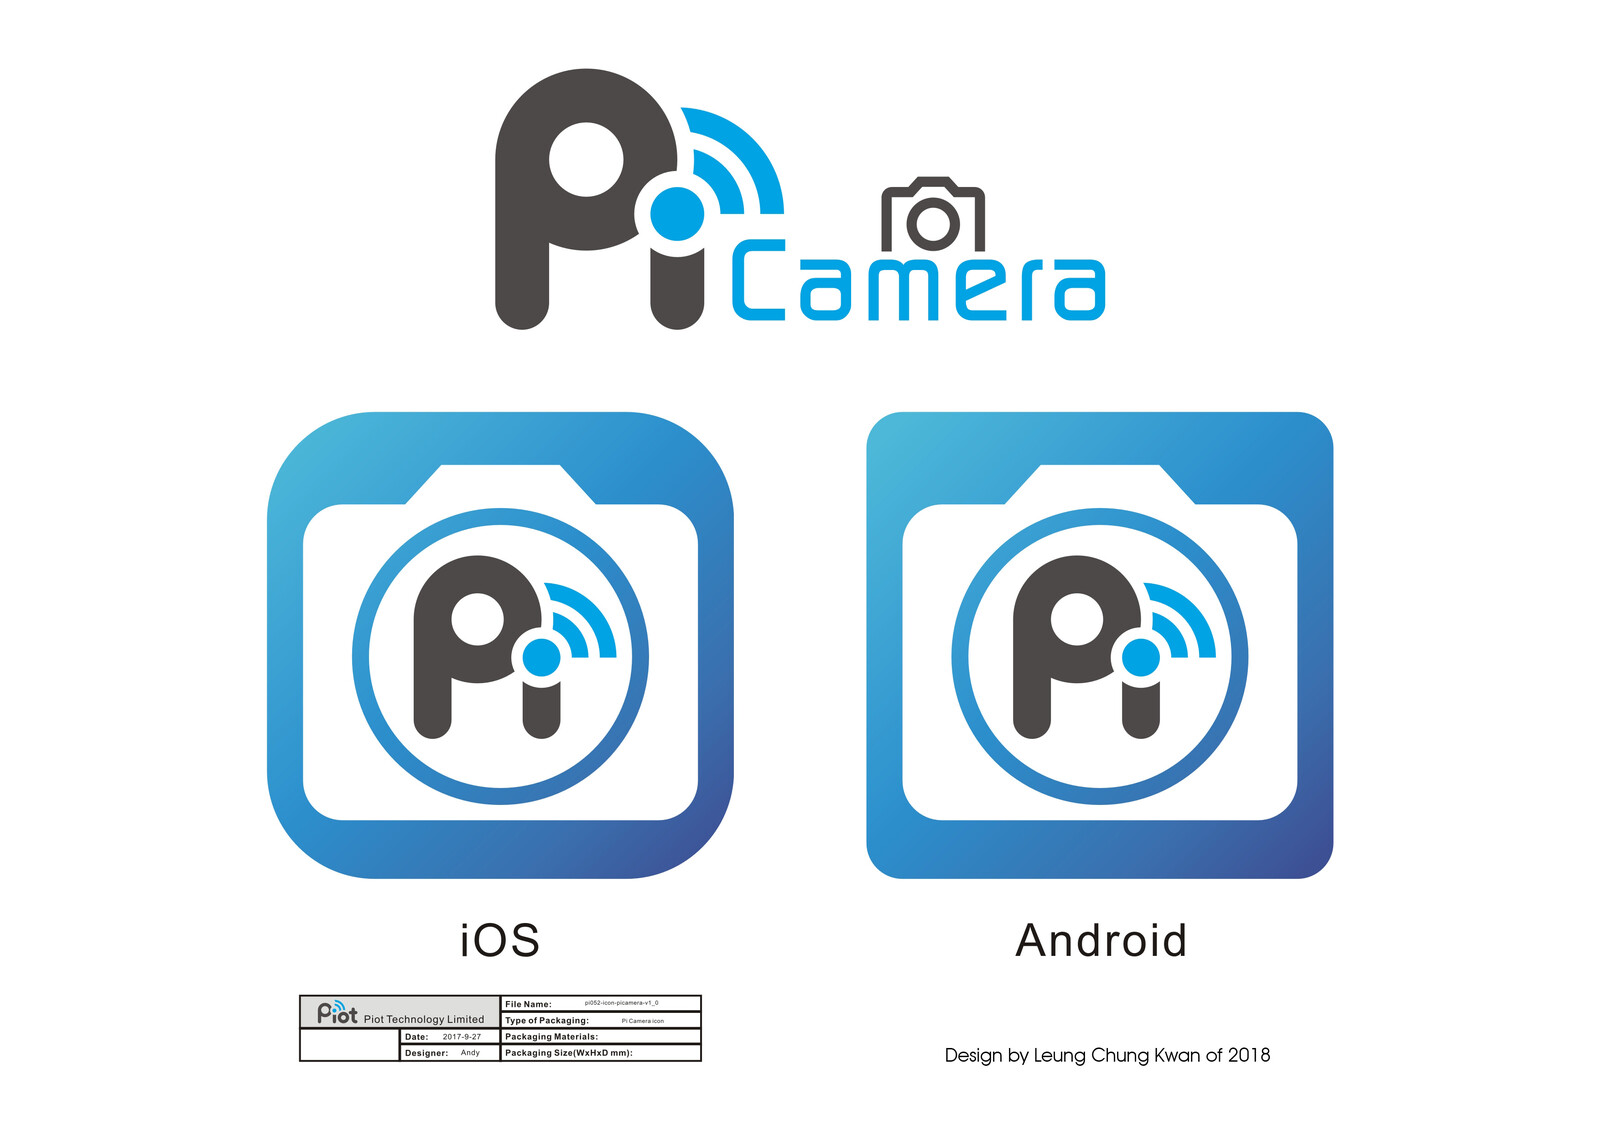 💎 App Icon | Design by Leung Chung Kwan on 2018 💎
App Name︰Picamera | Client︰Piot Technology Limited